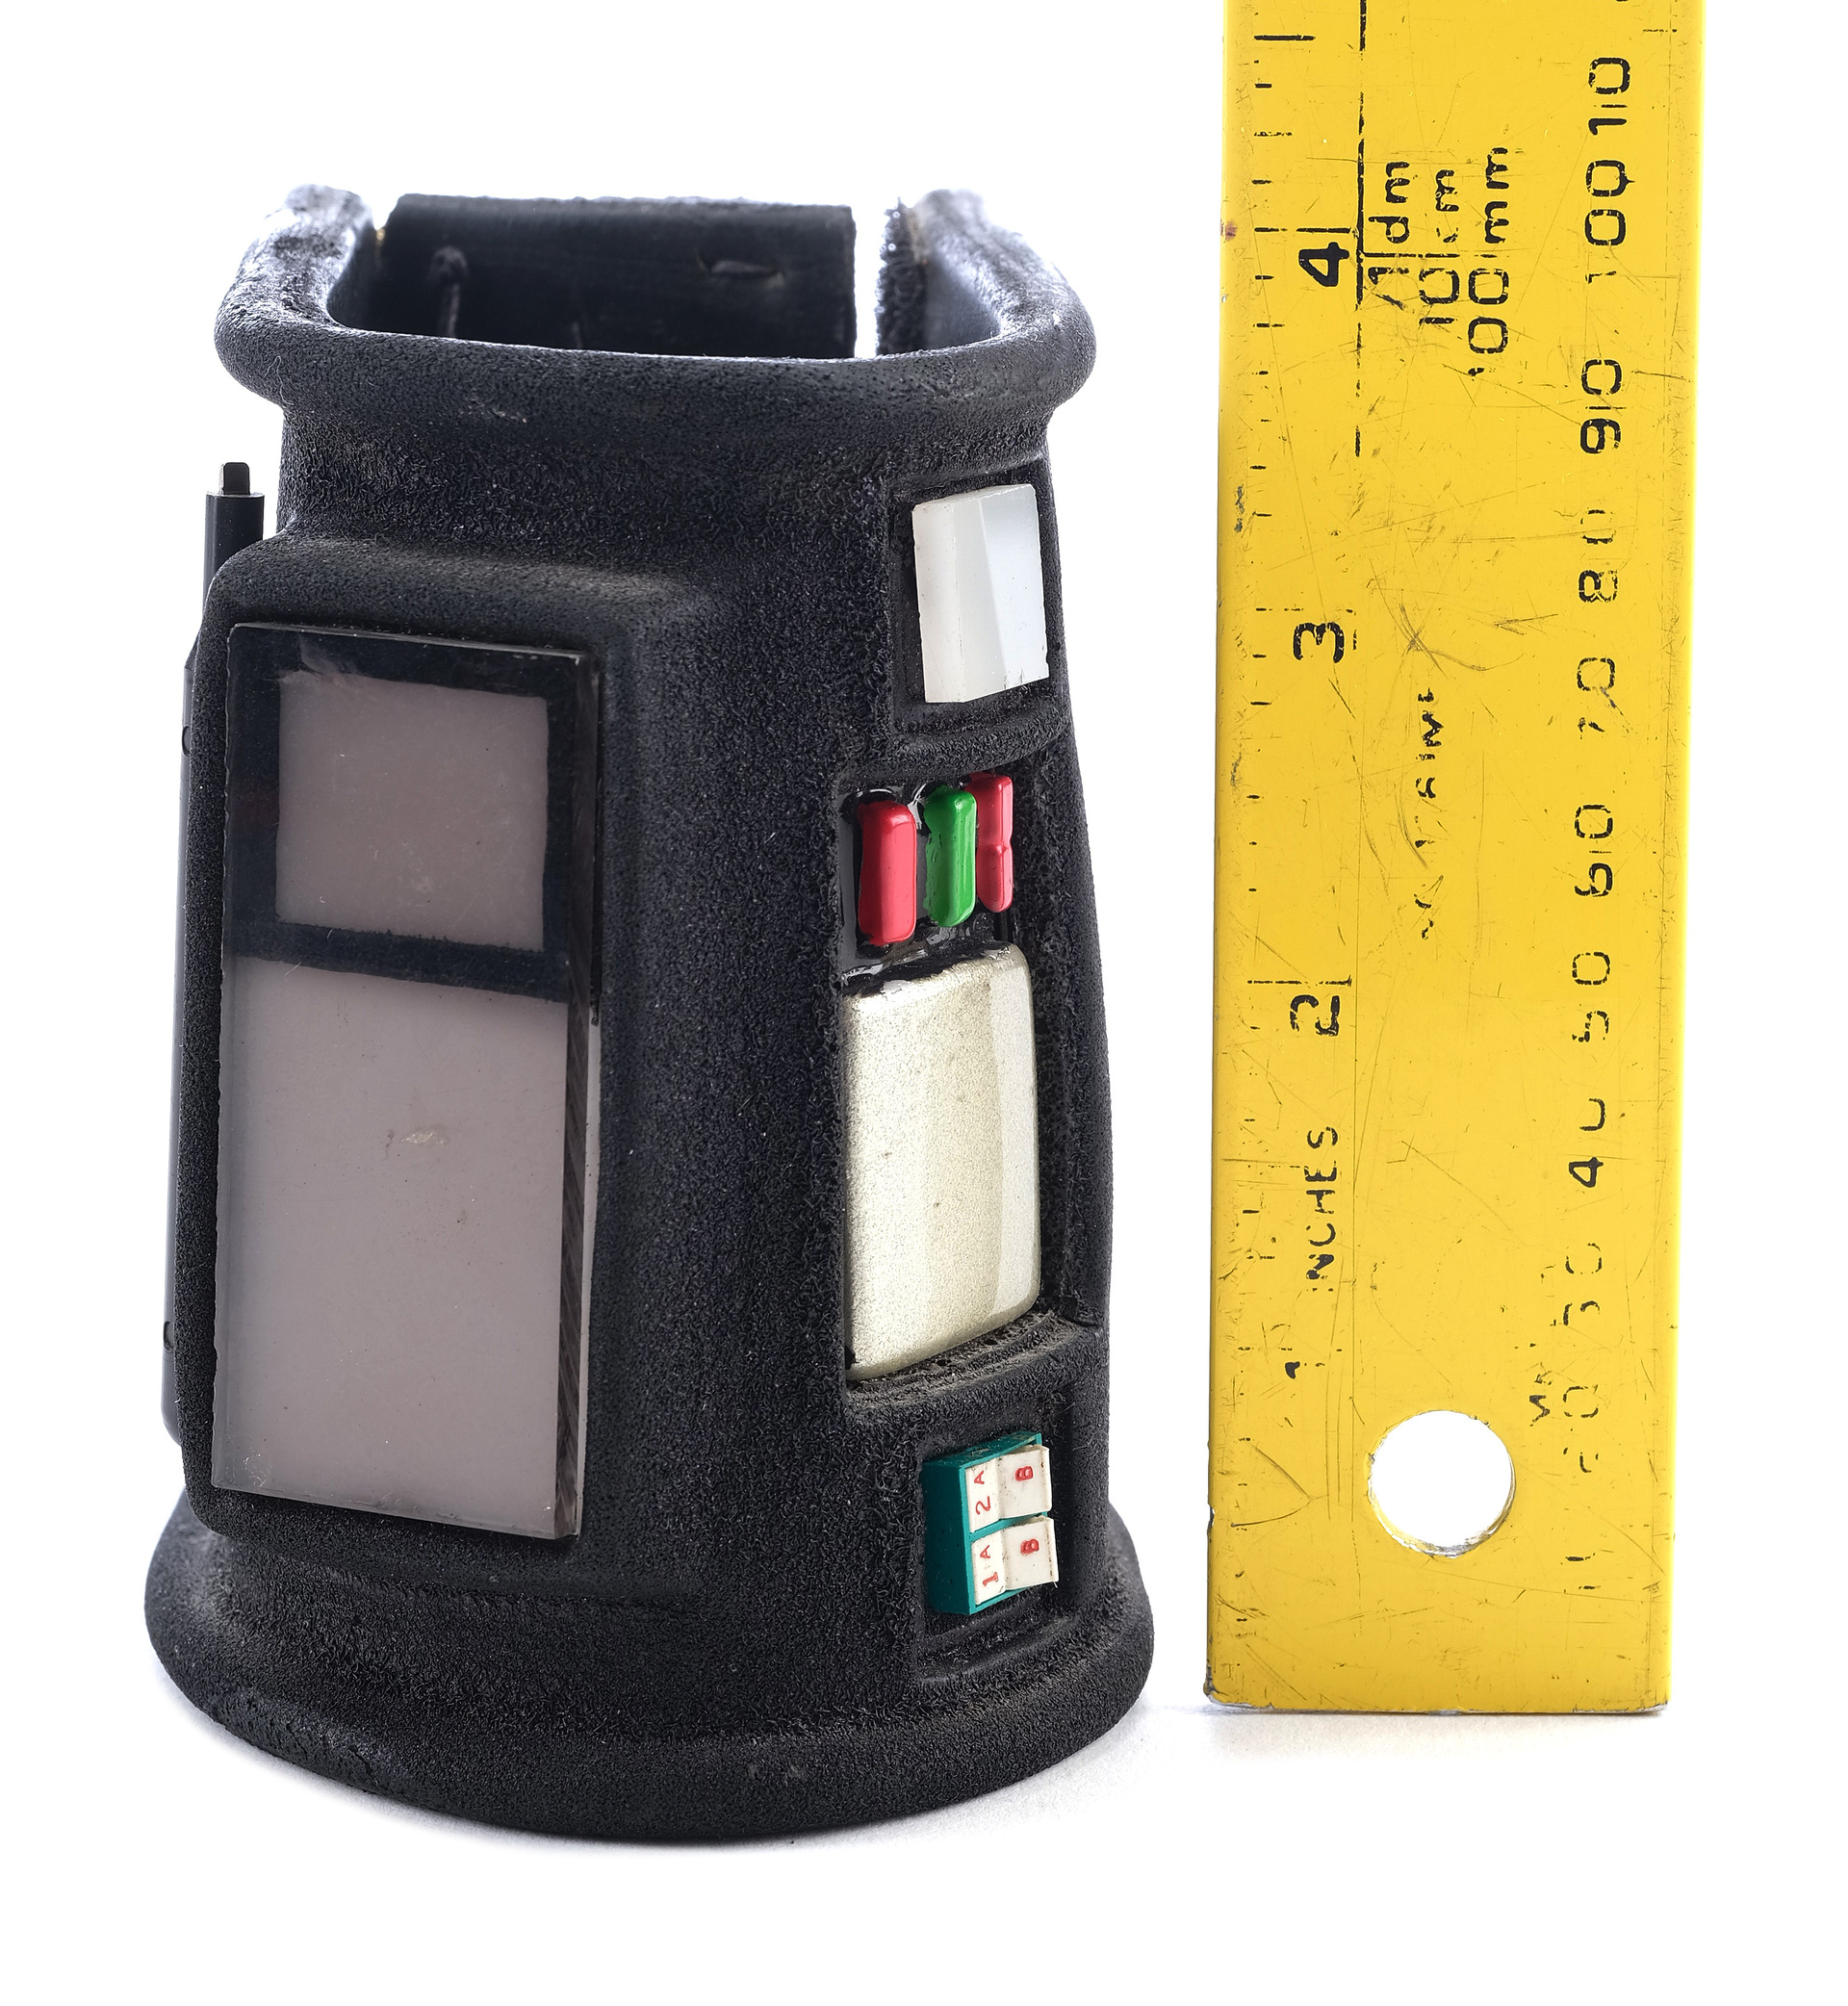 BACK TO THE FUTURE PART II - Police Wrist Communicator - Image 5 of 6